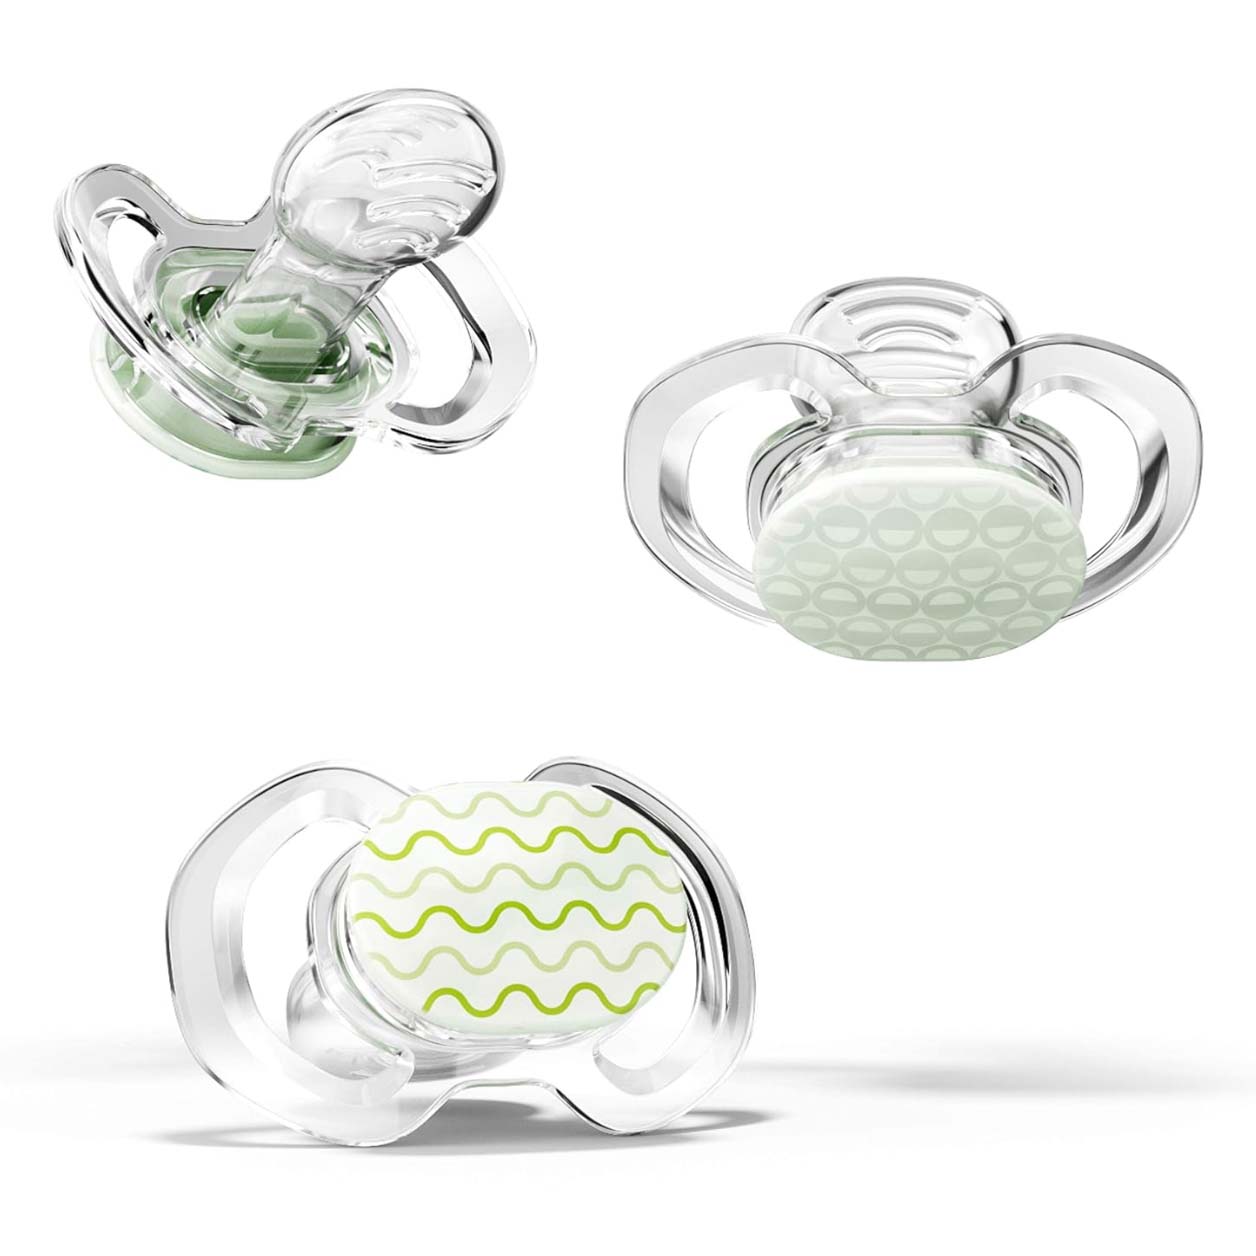 Green transparent pacifiers